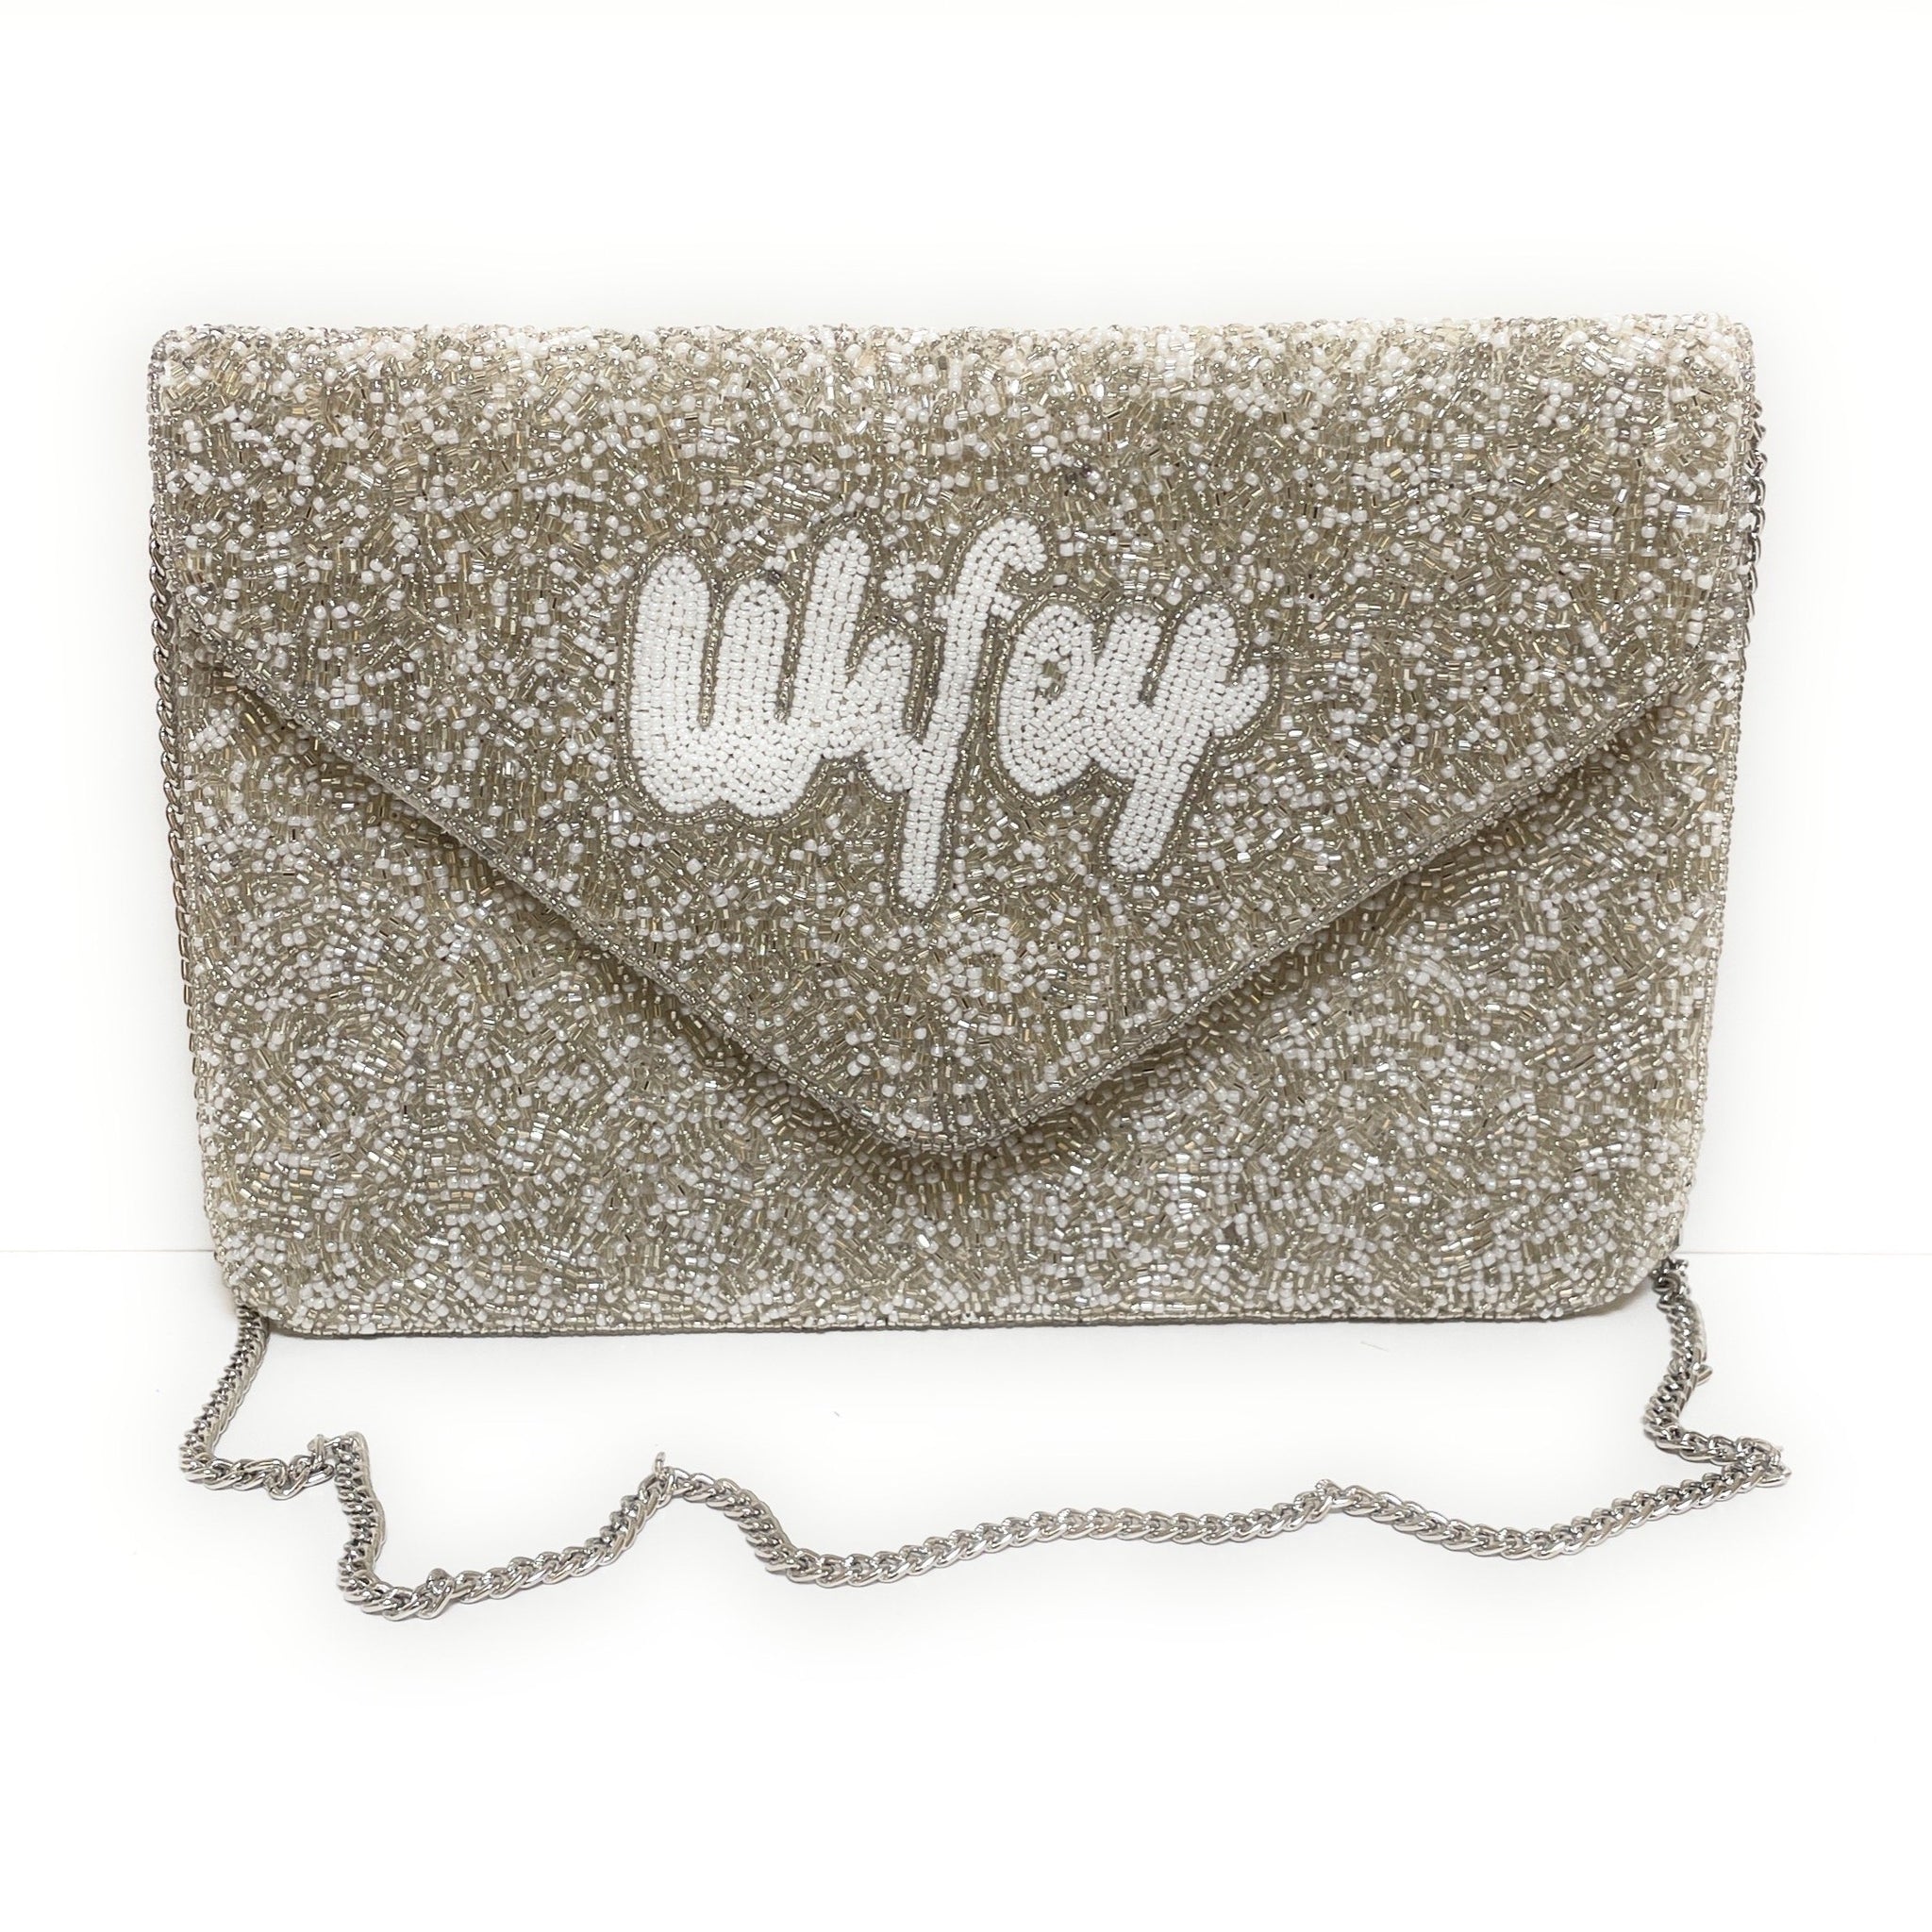 Rubans Ethereal Glamour Handcrafted Shimmery Clutch